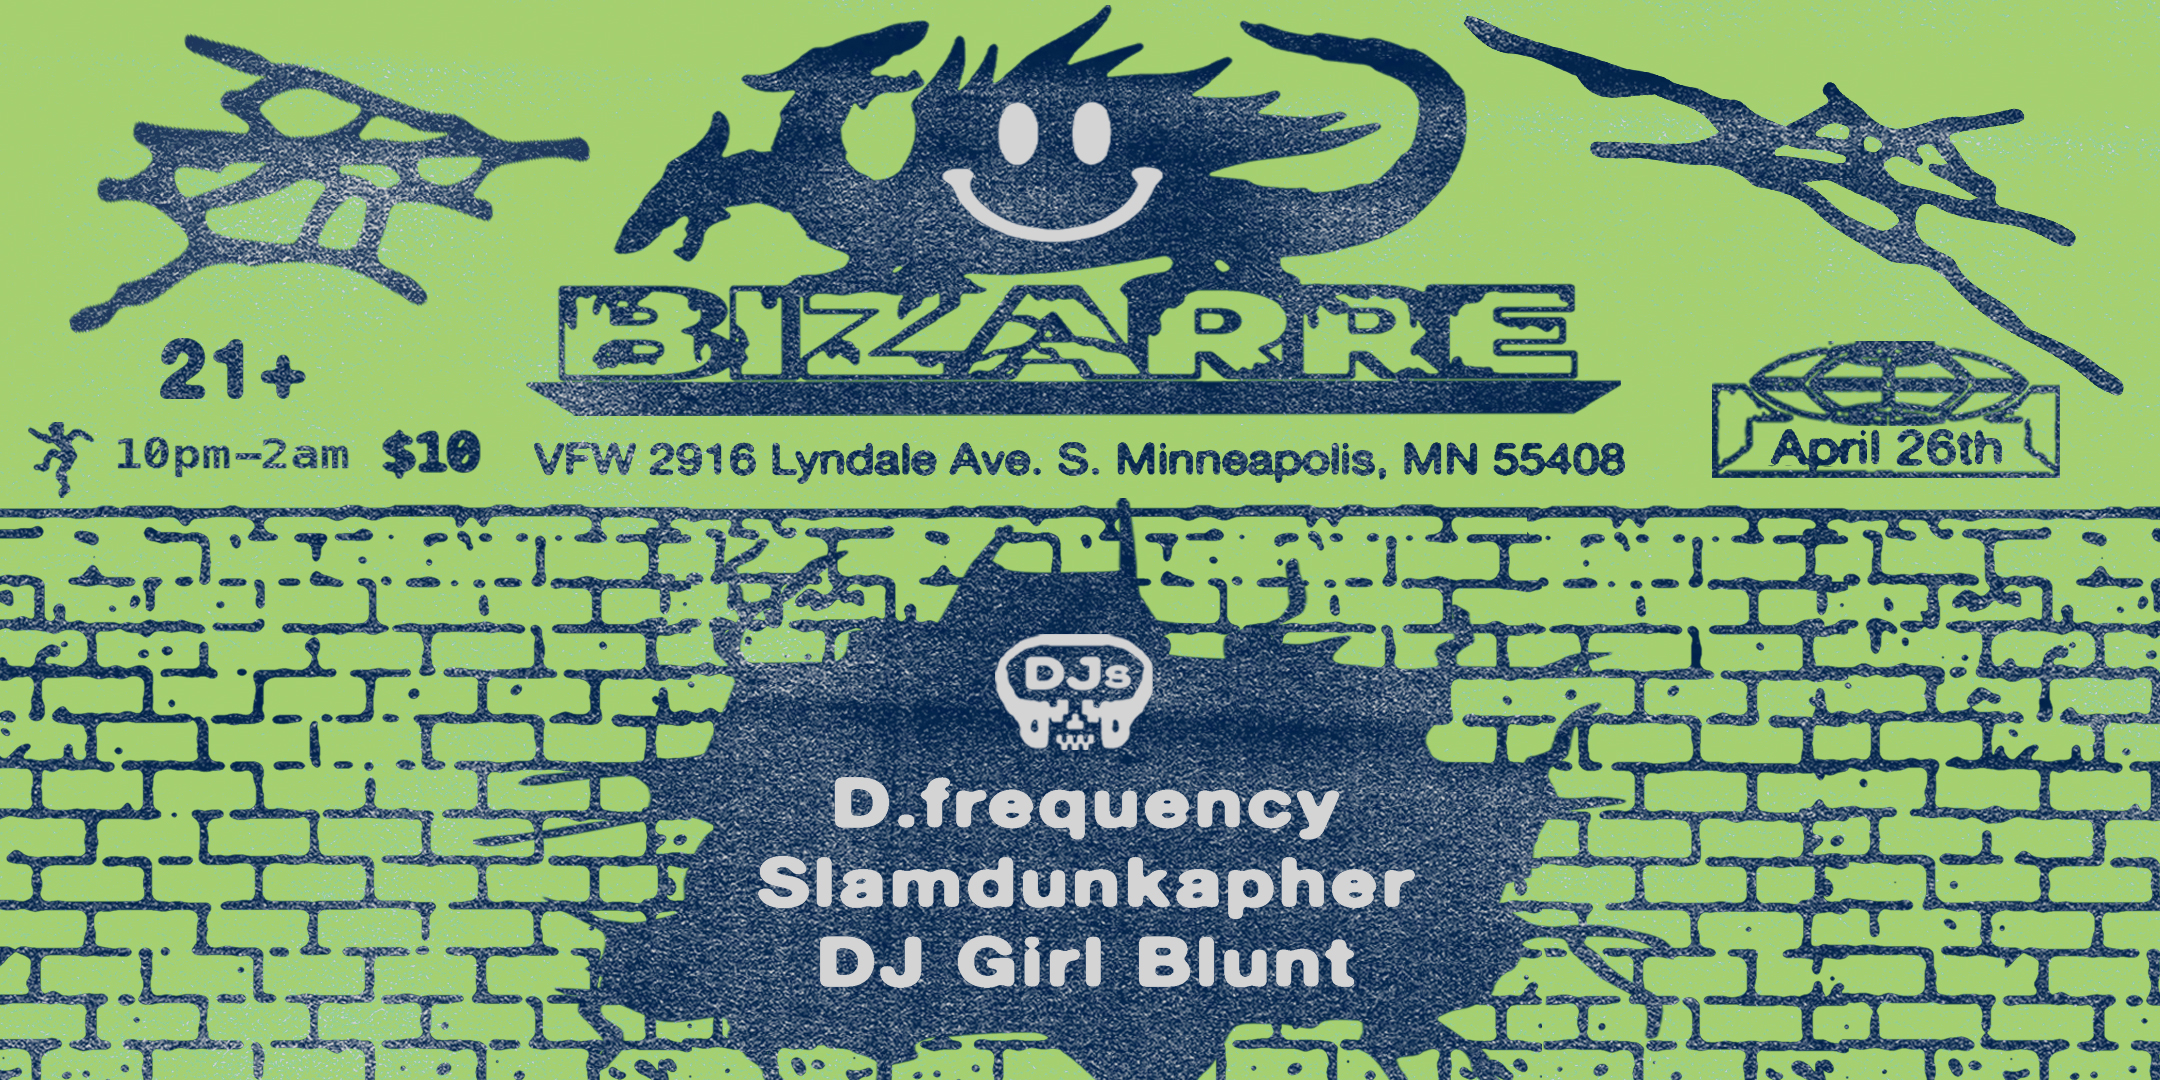 BIZARRE Dance Party DJs D.frequency Jim Frick DJ Girl Blunt Friday April 26 James Ballentine "Uptown" VFW Post 246 2916 Lyndale Ave S Mpls Doors 10pm :: Music 10pm :: 21+ GA: $5 ADV / $10 DOS